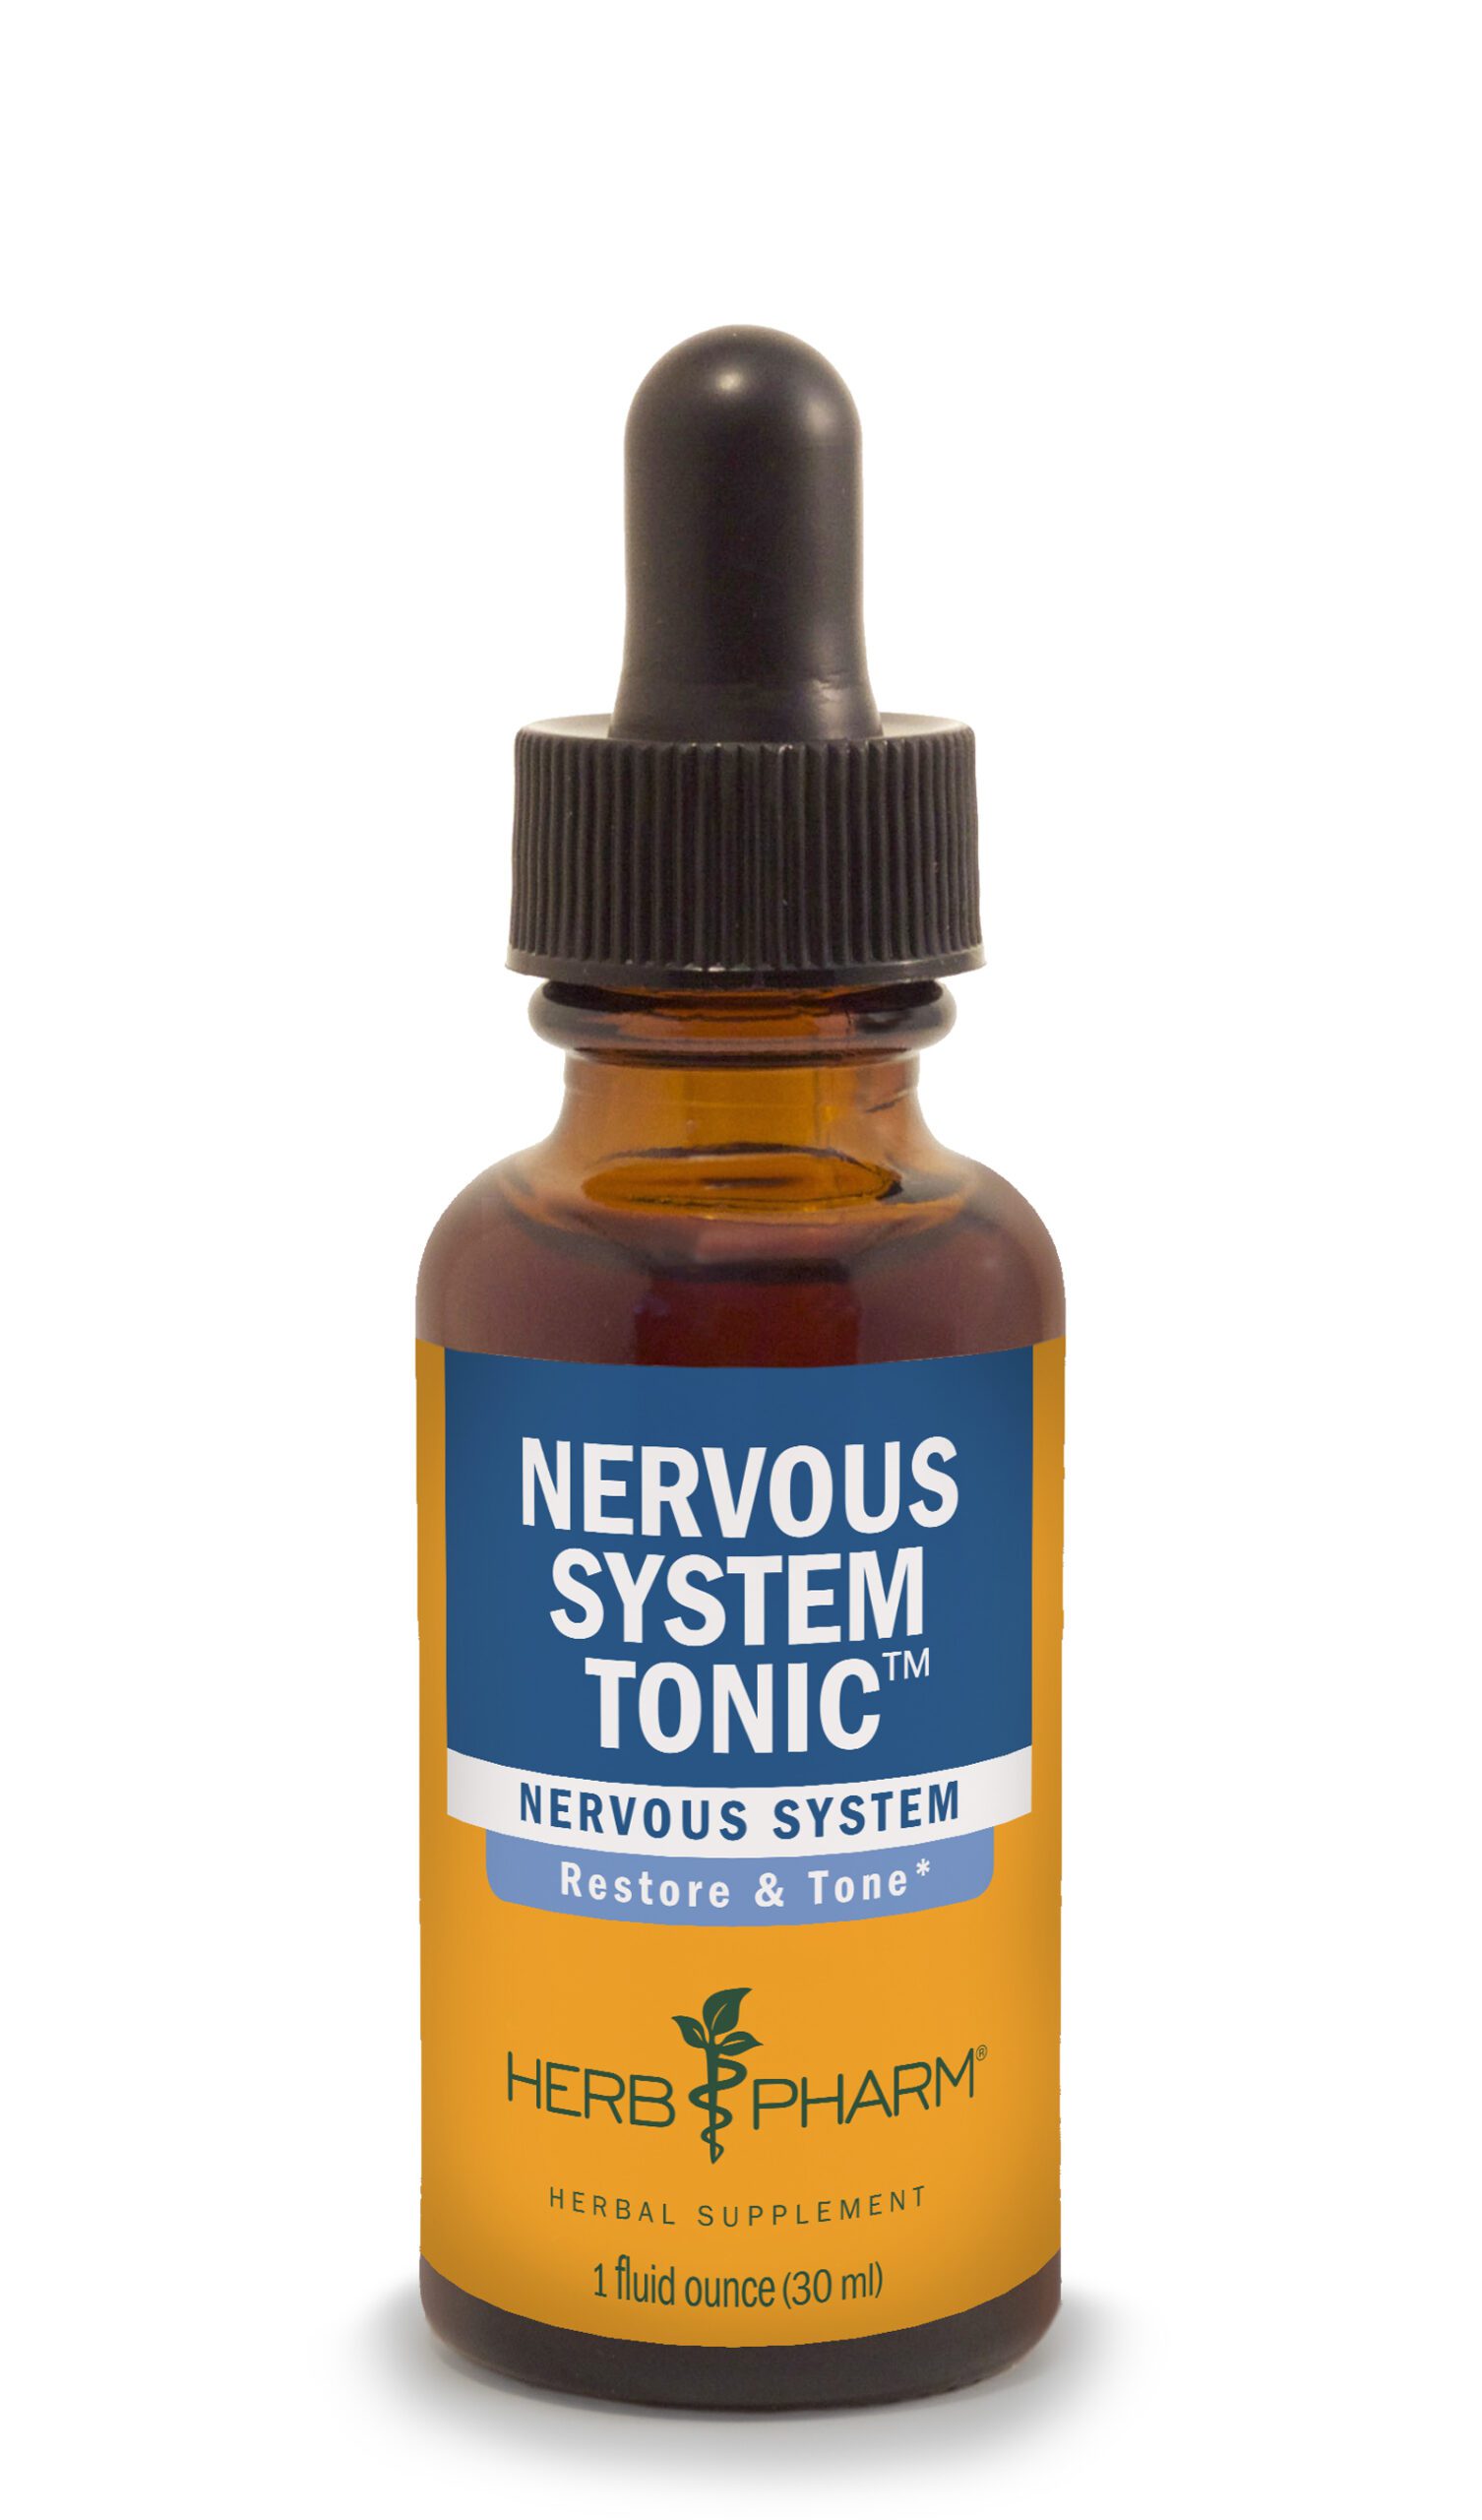 Product Listing Image for Herb Pharm Nervous System Tonic 1oz